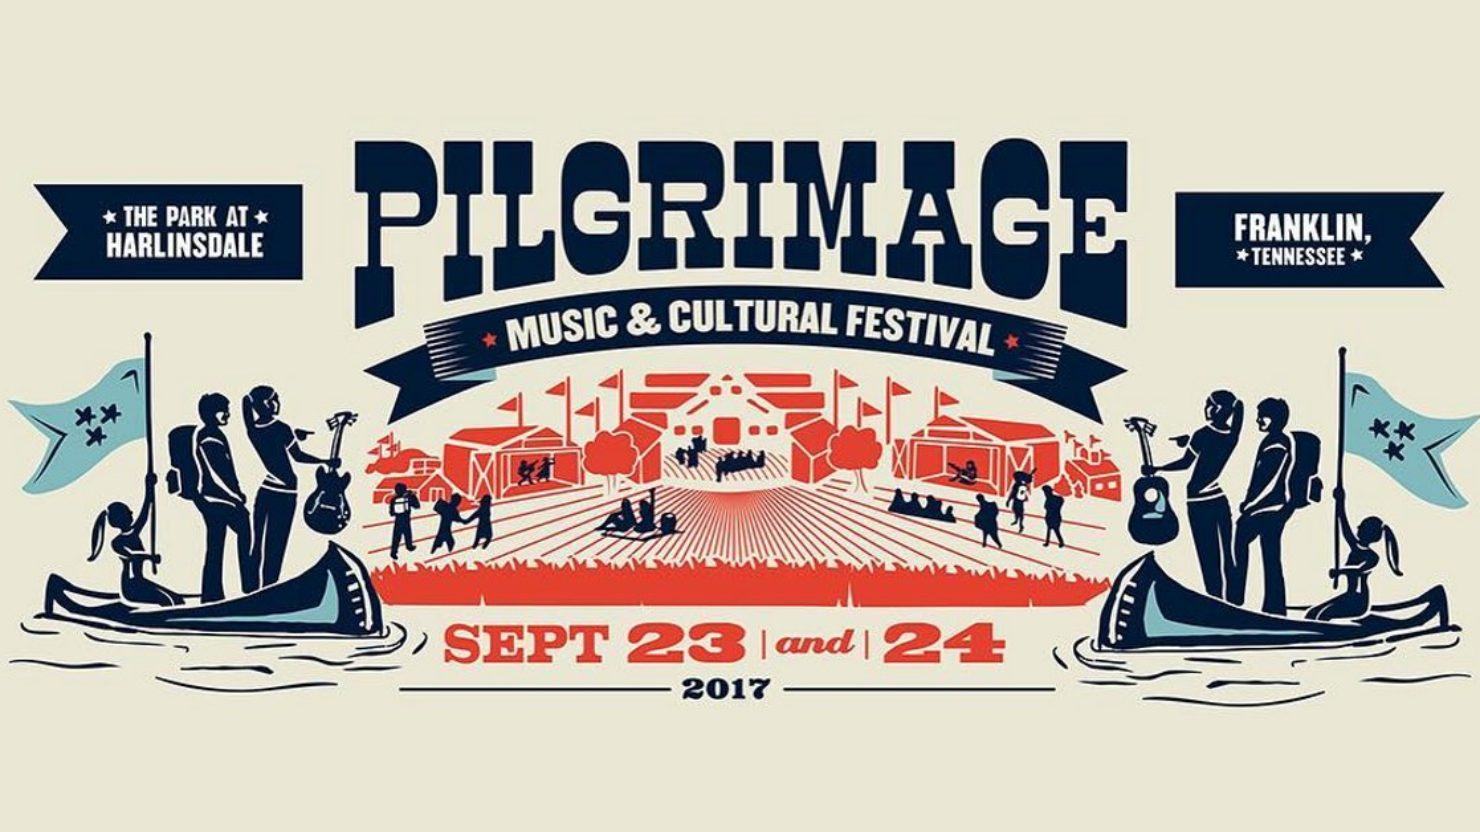 Here’s Your Ultimate Guide to the 2017 Pilgrimage Music & Cultural Festival